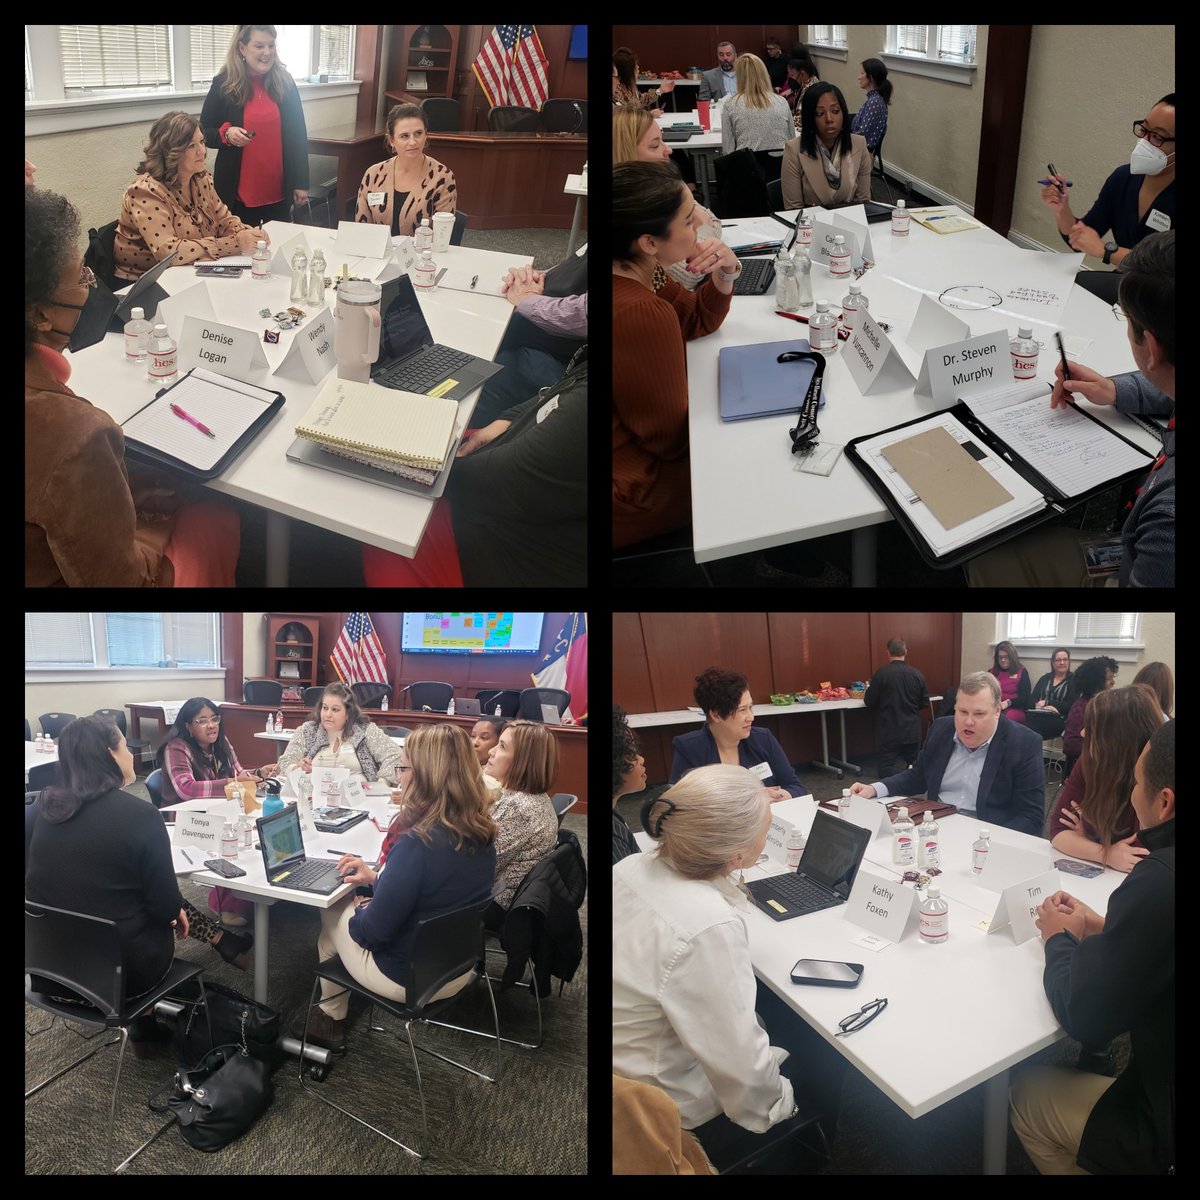 Our new #HCSStrategicPlan will include the hard work of many in the @HarnettCoSchool community!  Today was a great day of planning with some amazing people!  Thanks to everyone who came out and participated! #SuccesswithHCS #LeadershipMatters #HarnettStrong #TheBestofHCS